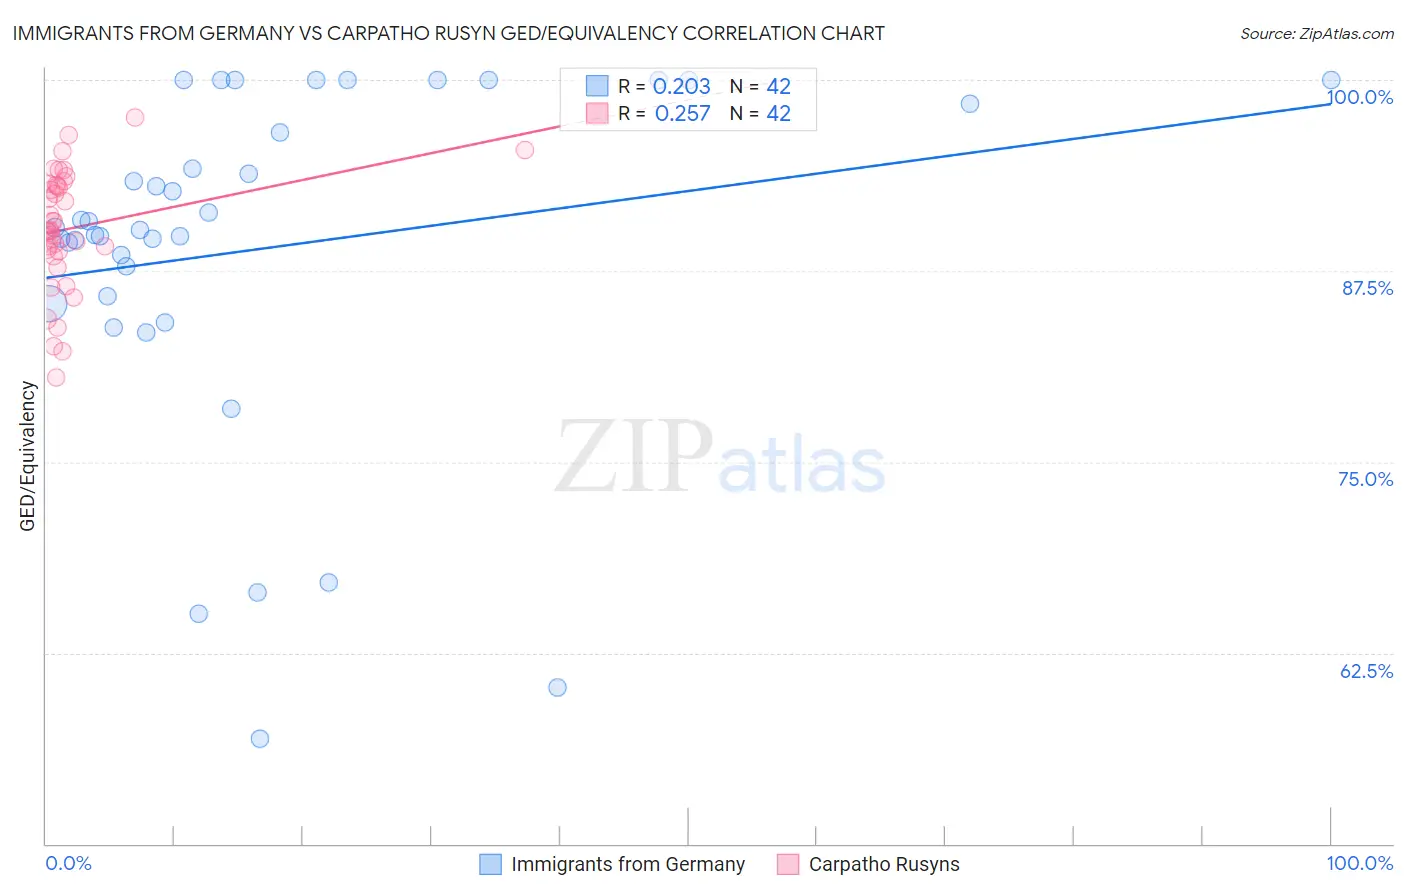 Immigrants from Germany vs Carpatho Rusyn GED/Equivalency